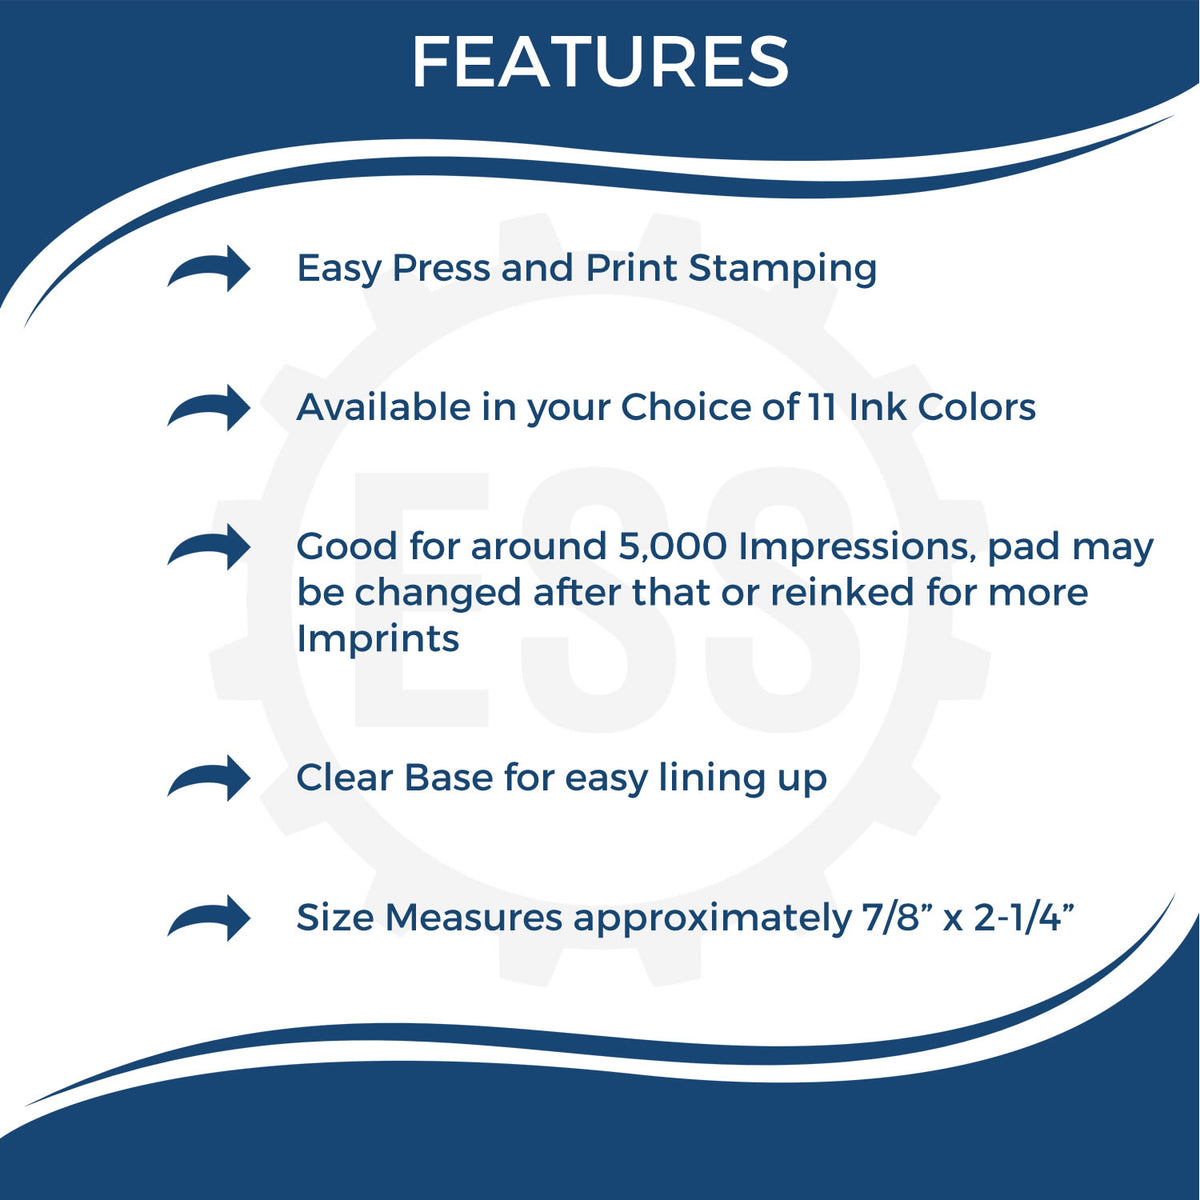 Large Self-Inking Covid-19 Test Pending Stamp